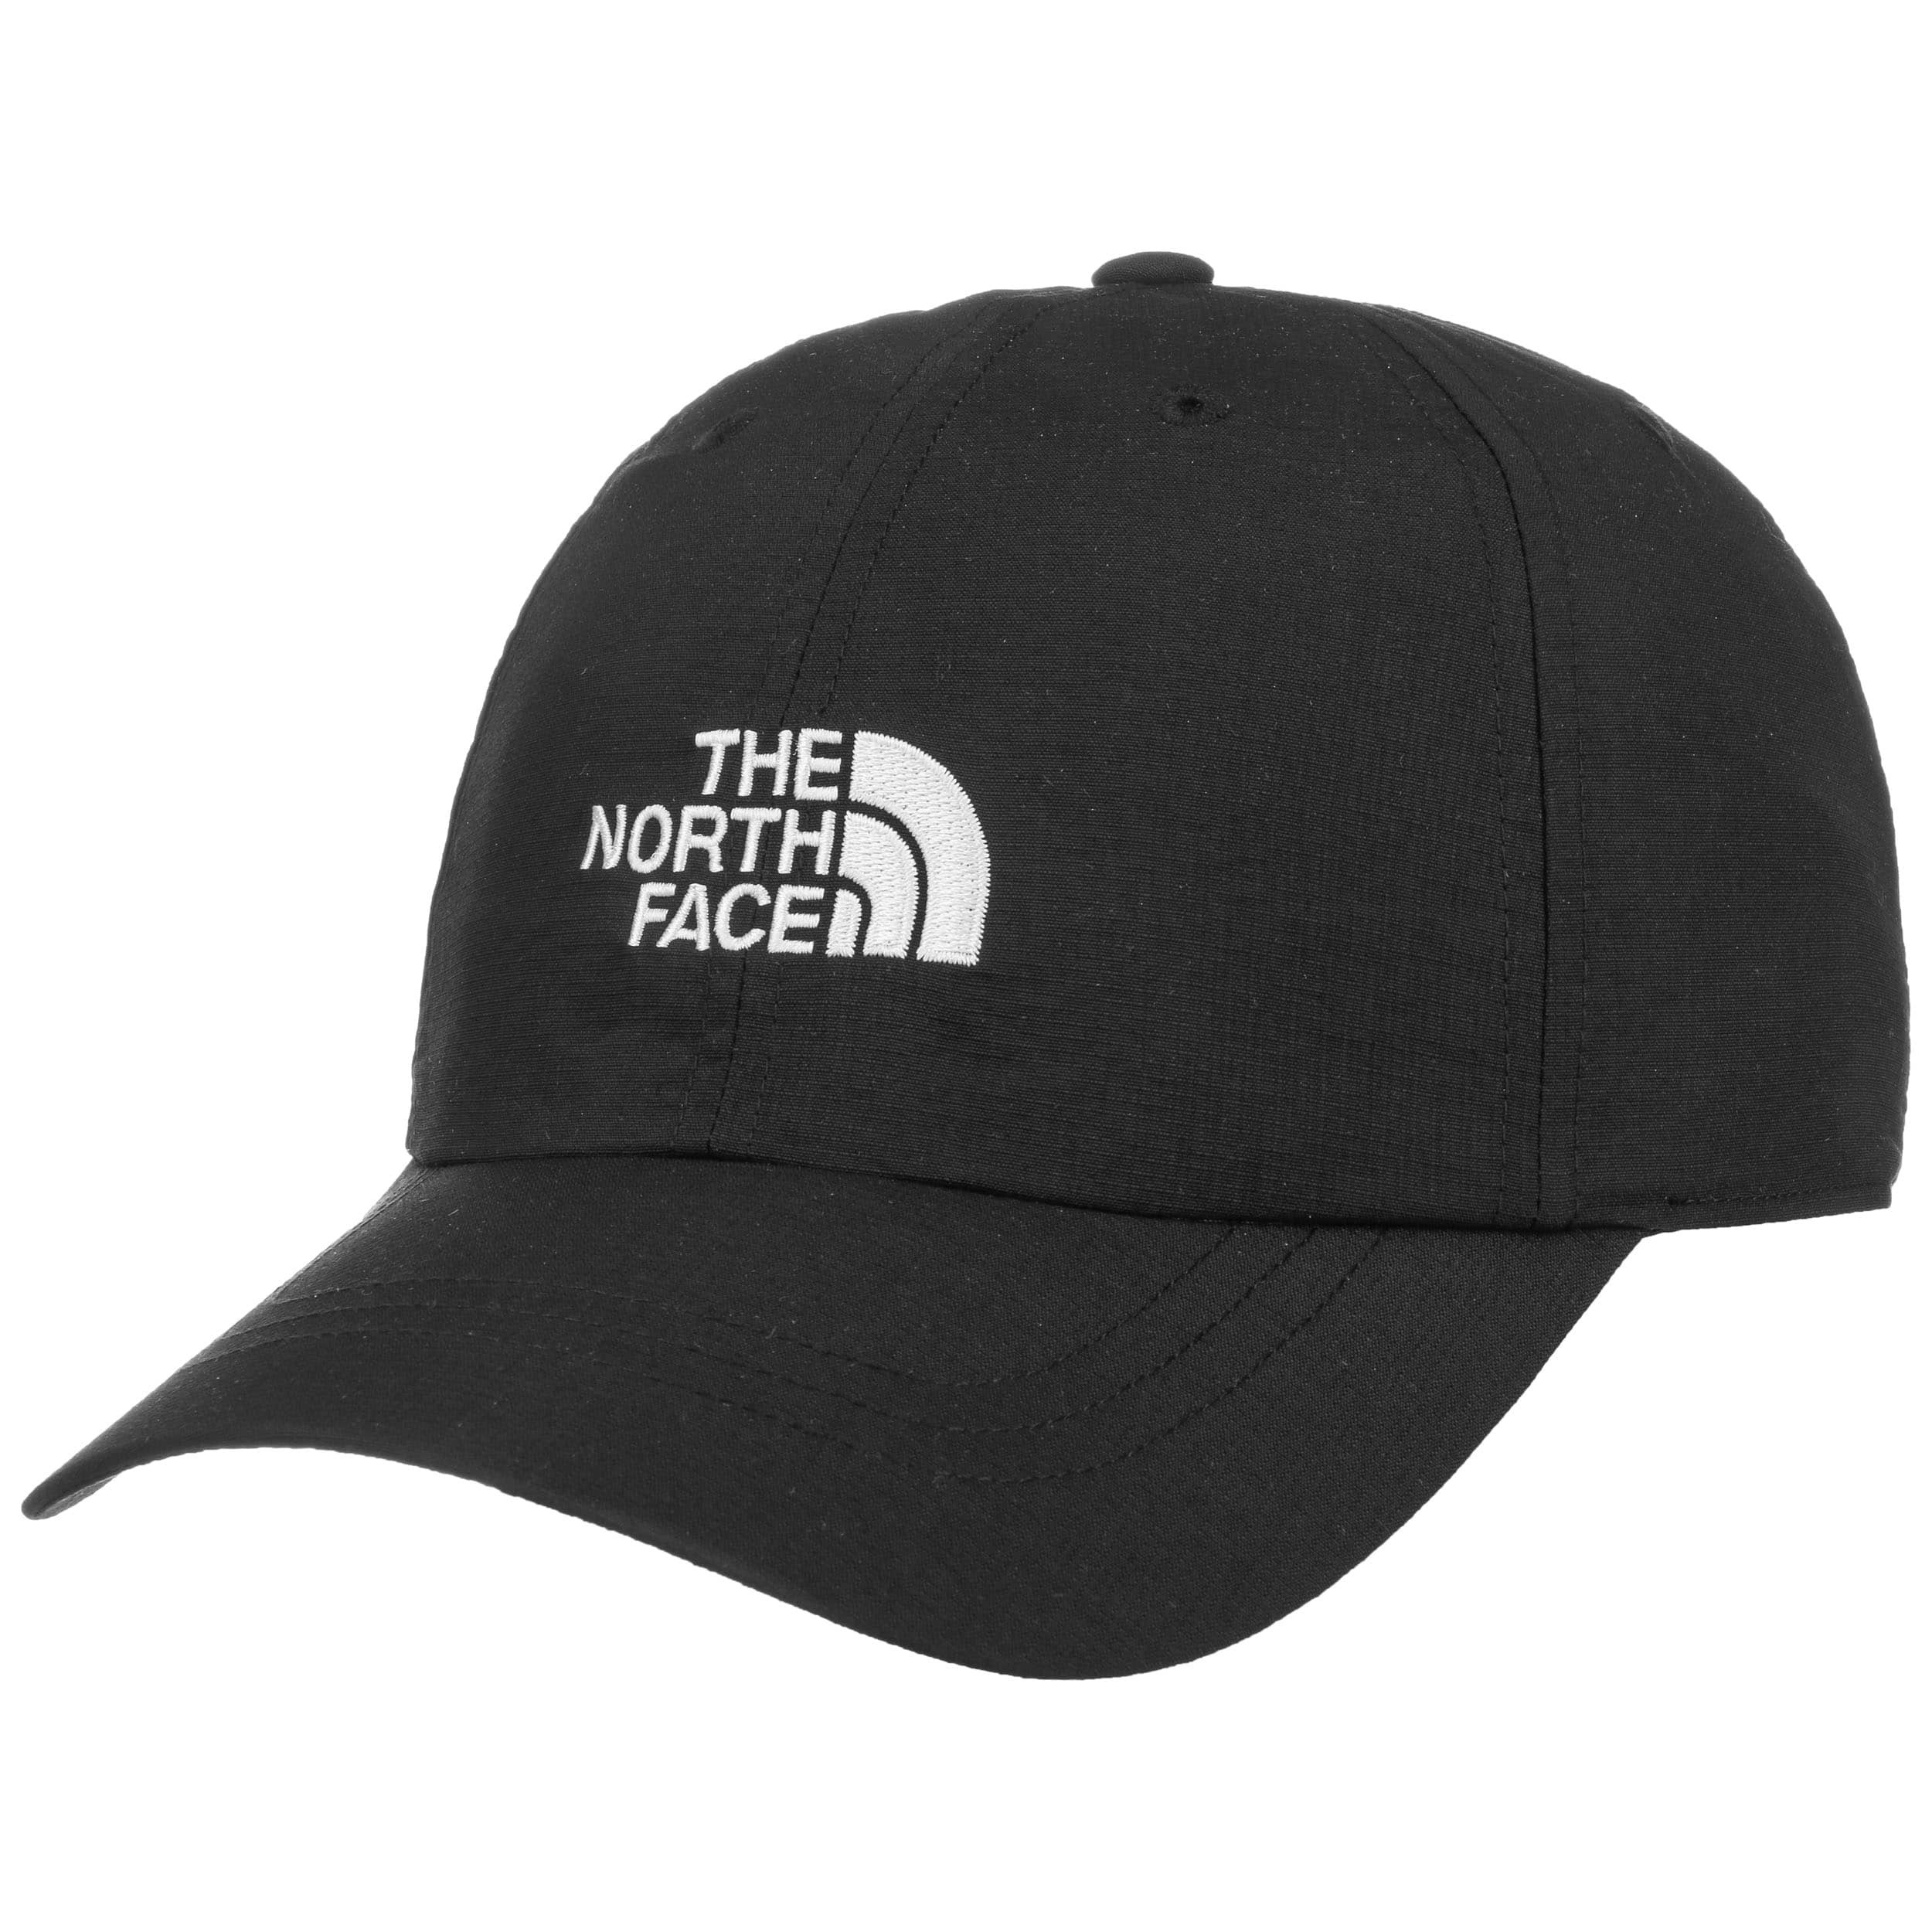 Casquette Horizon Vintage by The North Face